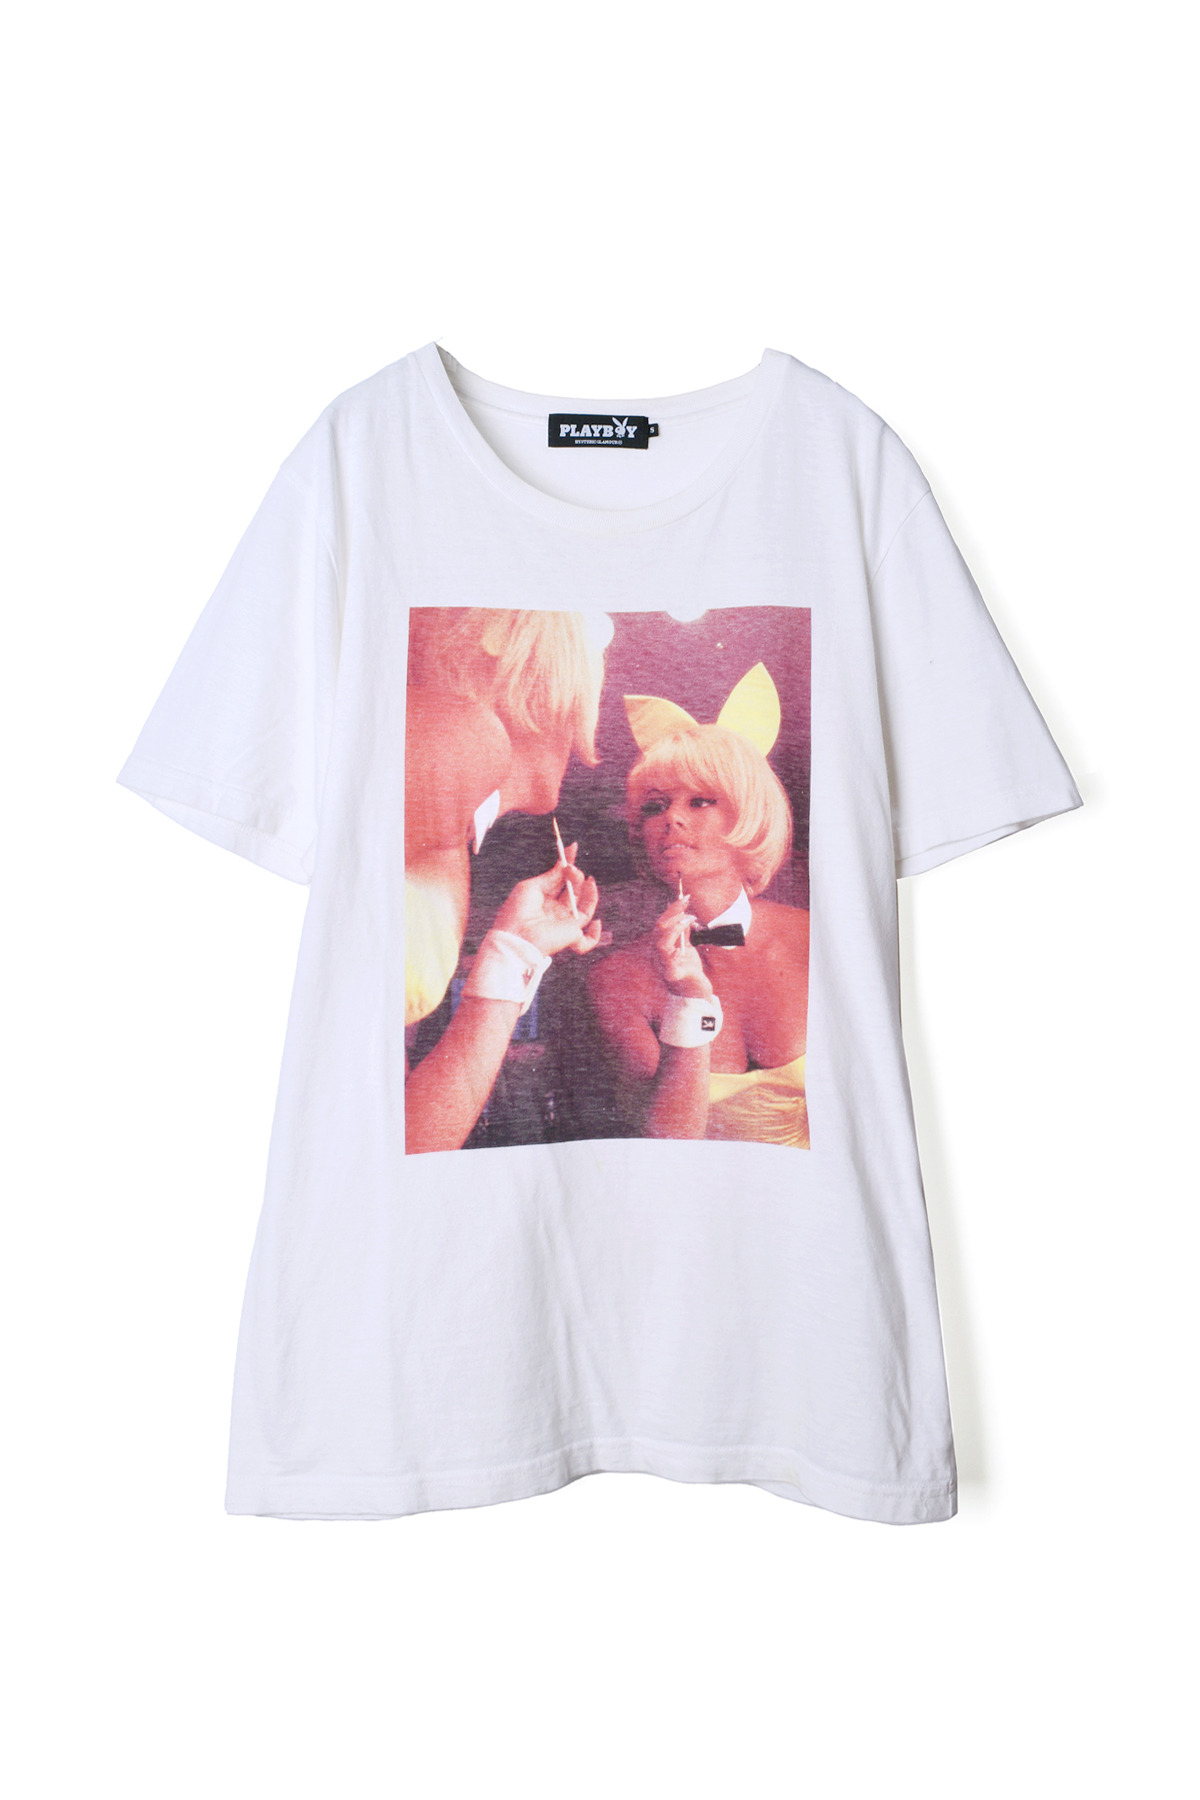 BRAND VINTAGE】HYSTERIC GLAMOUR x PLAYBOY T-shirt/White #4558 [mn 